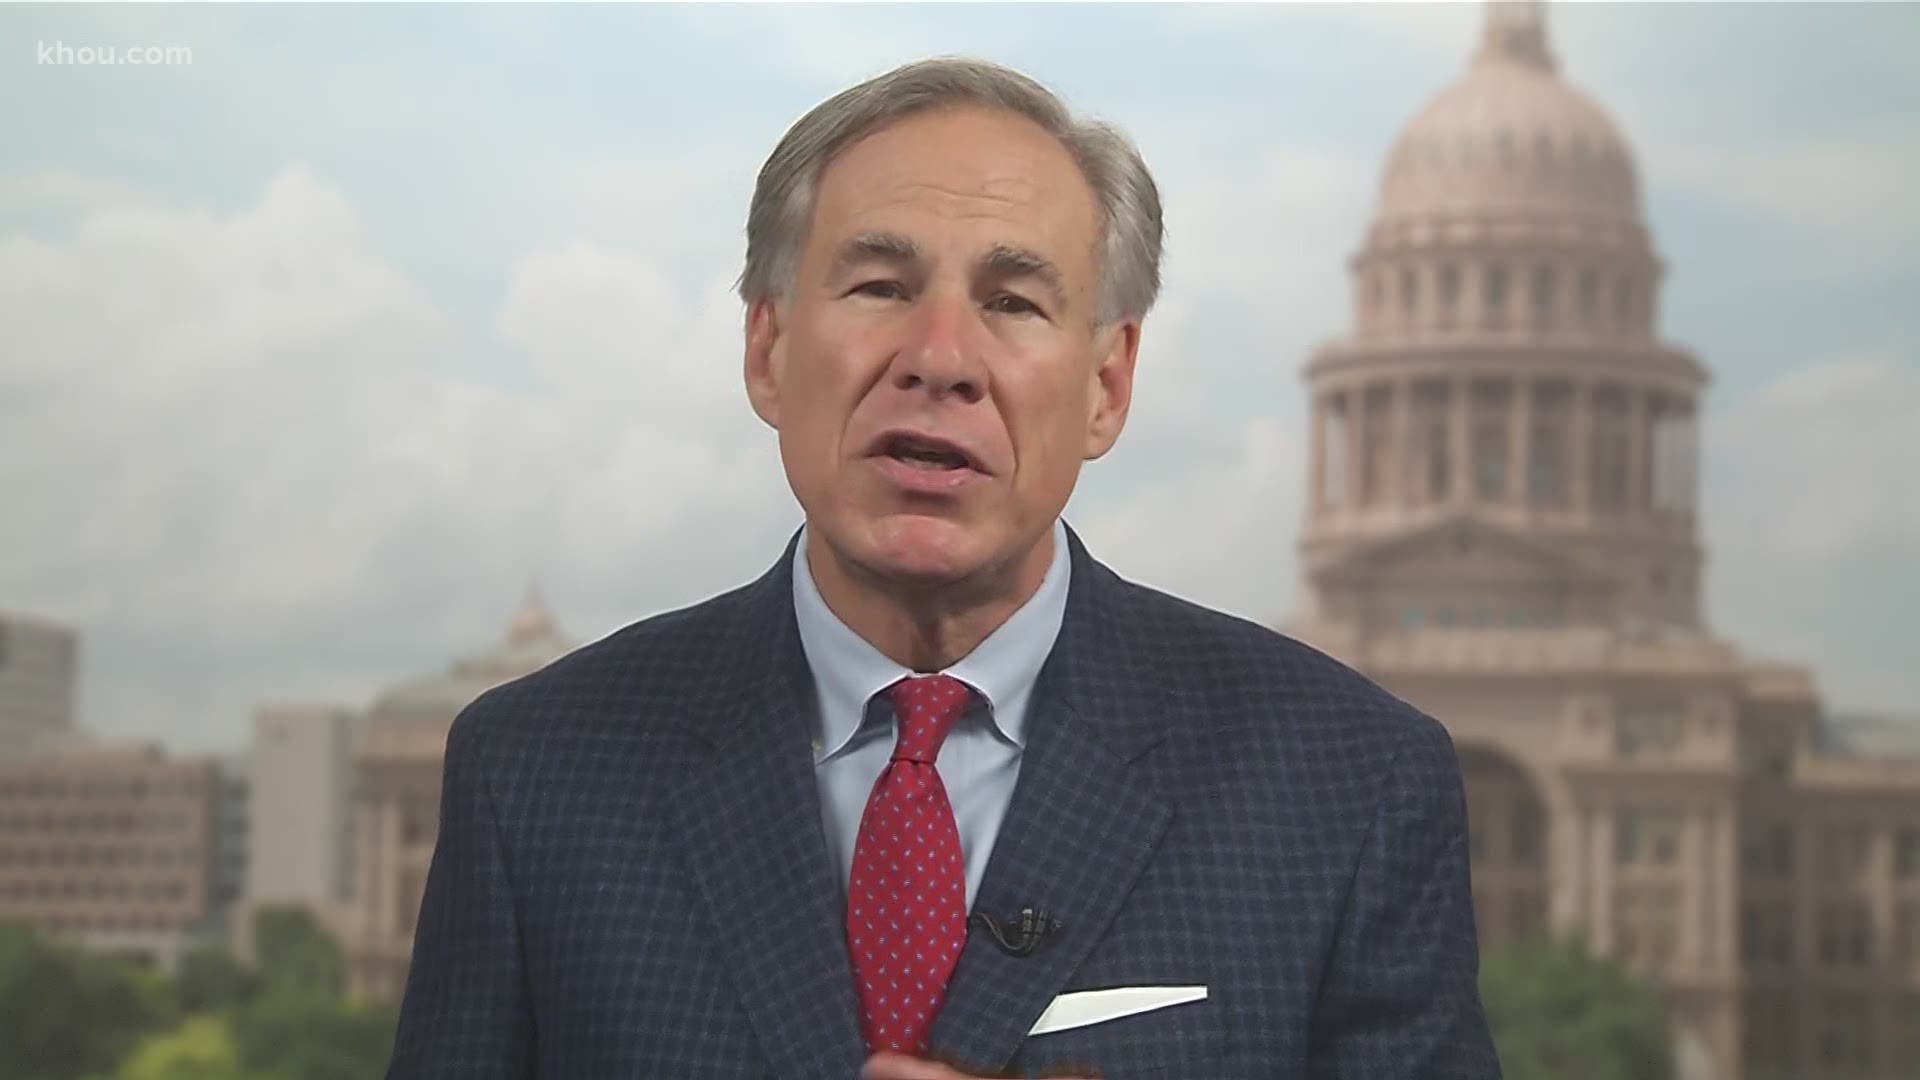 Gov. Abbott answers questions about Texas' response to the COVID-19 pandemic.